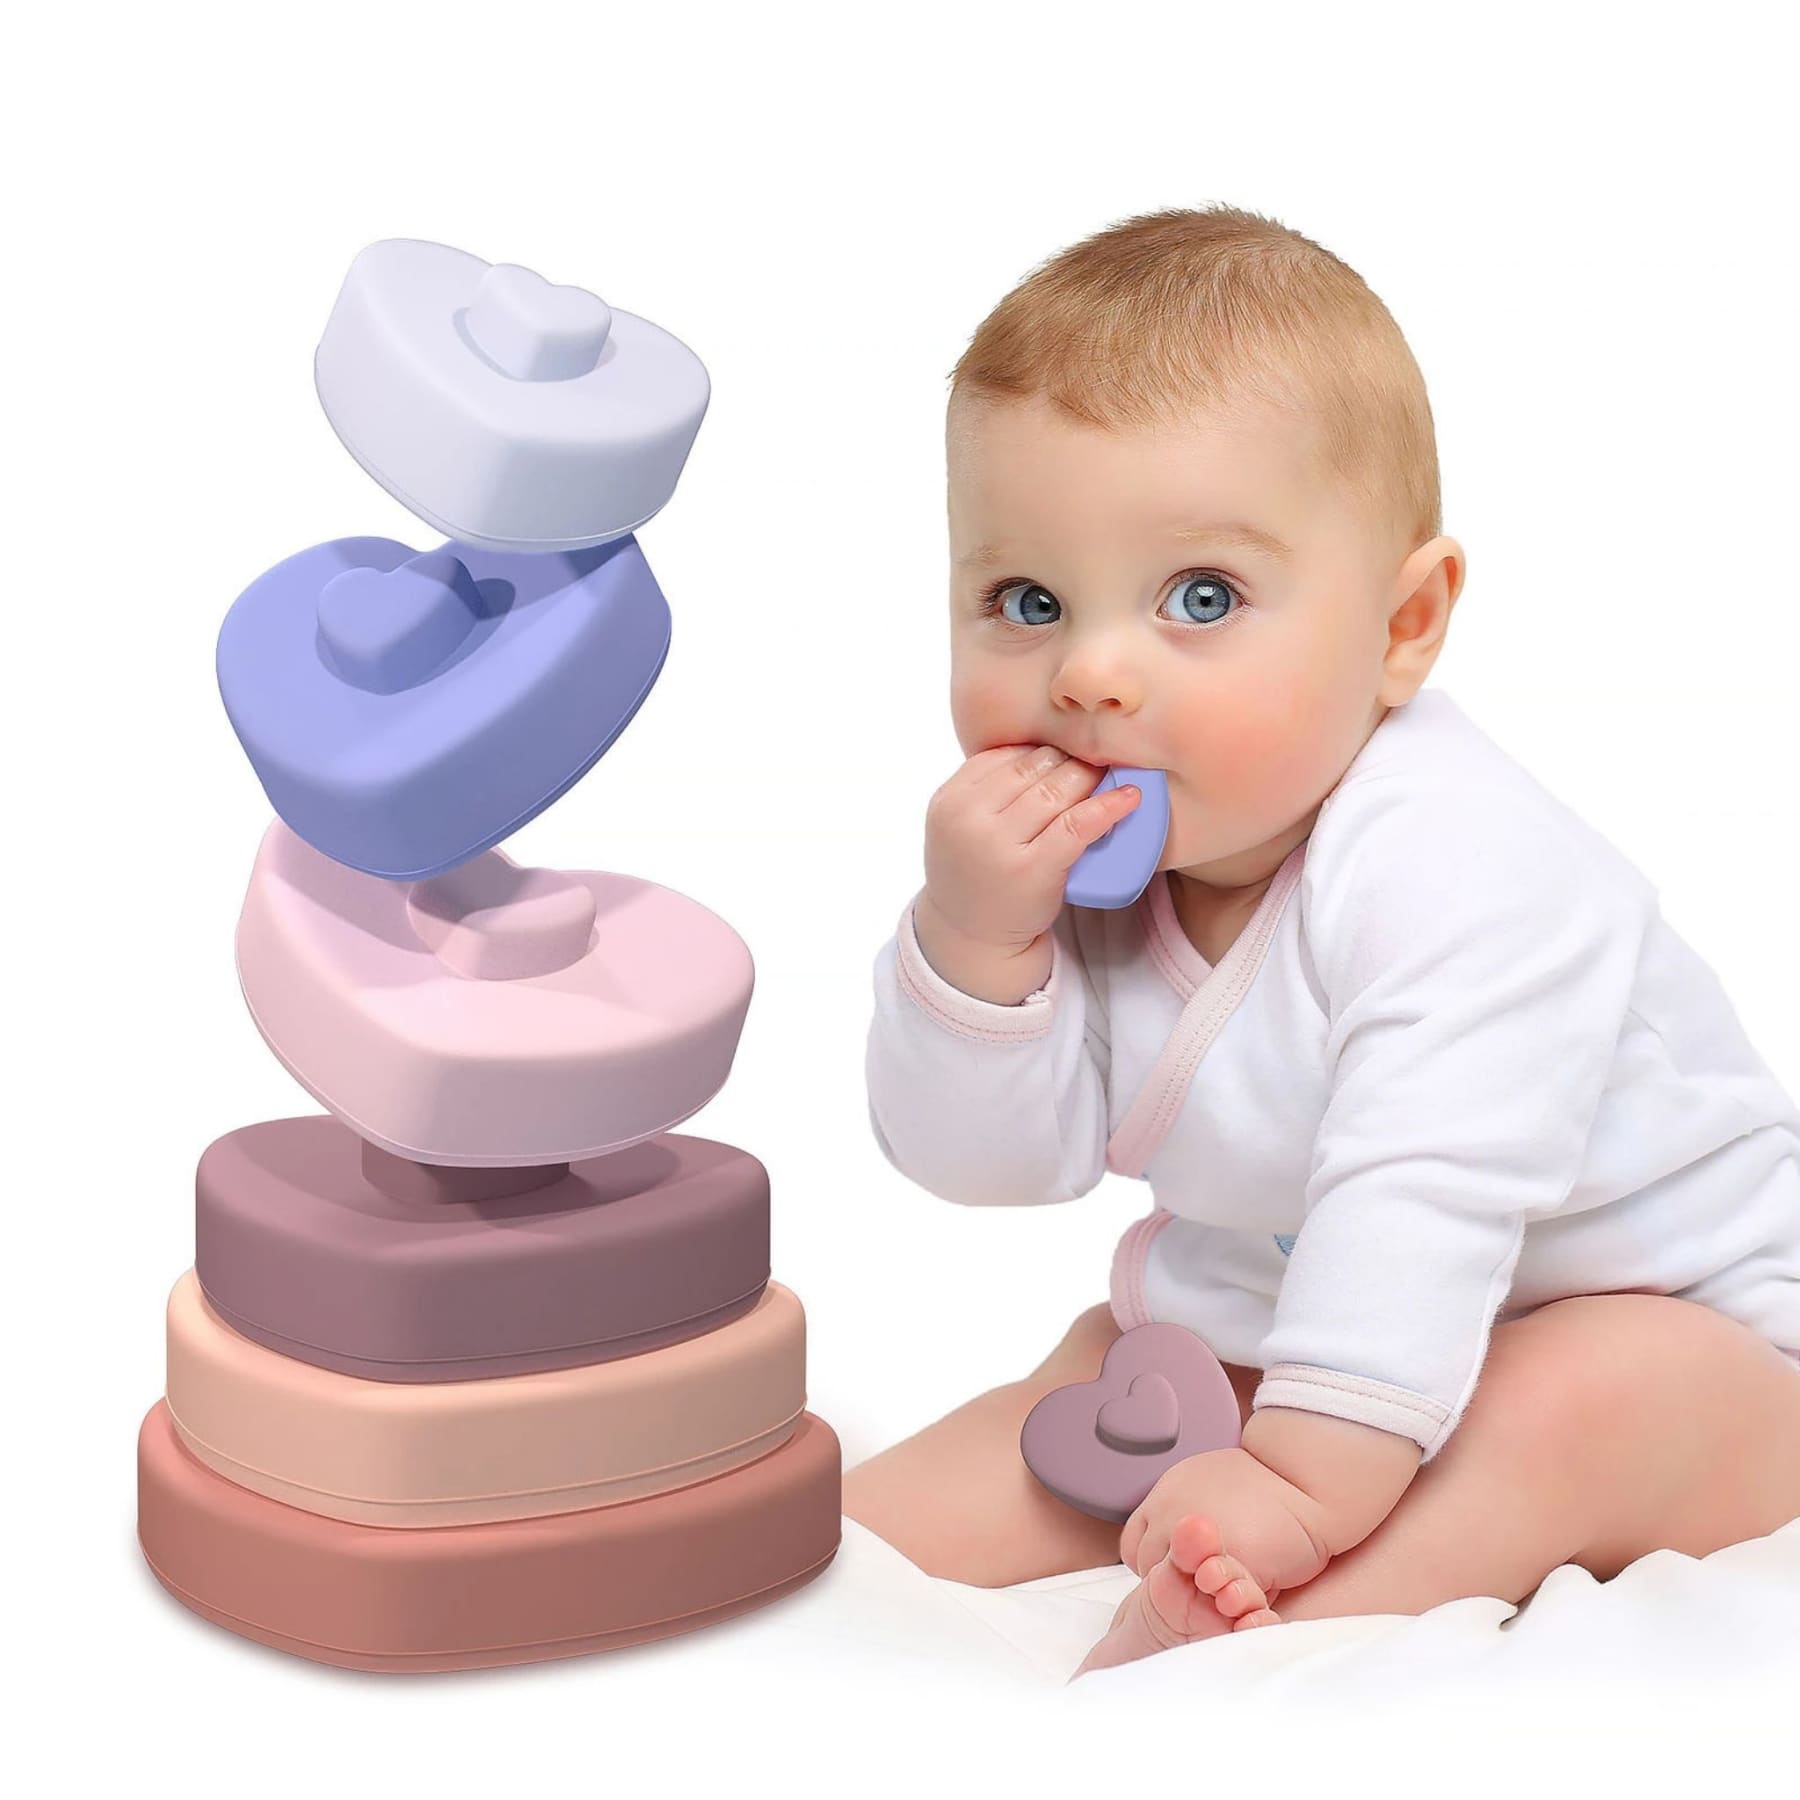 baby playing with heart shaped stacker toys and nesting toysfor babies and kids - Hunny bubba kids